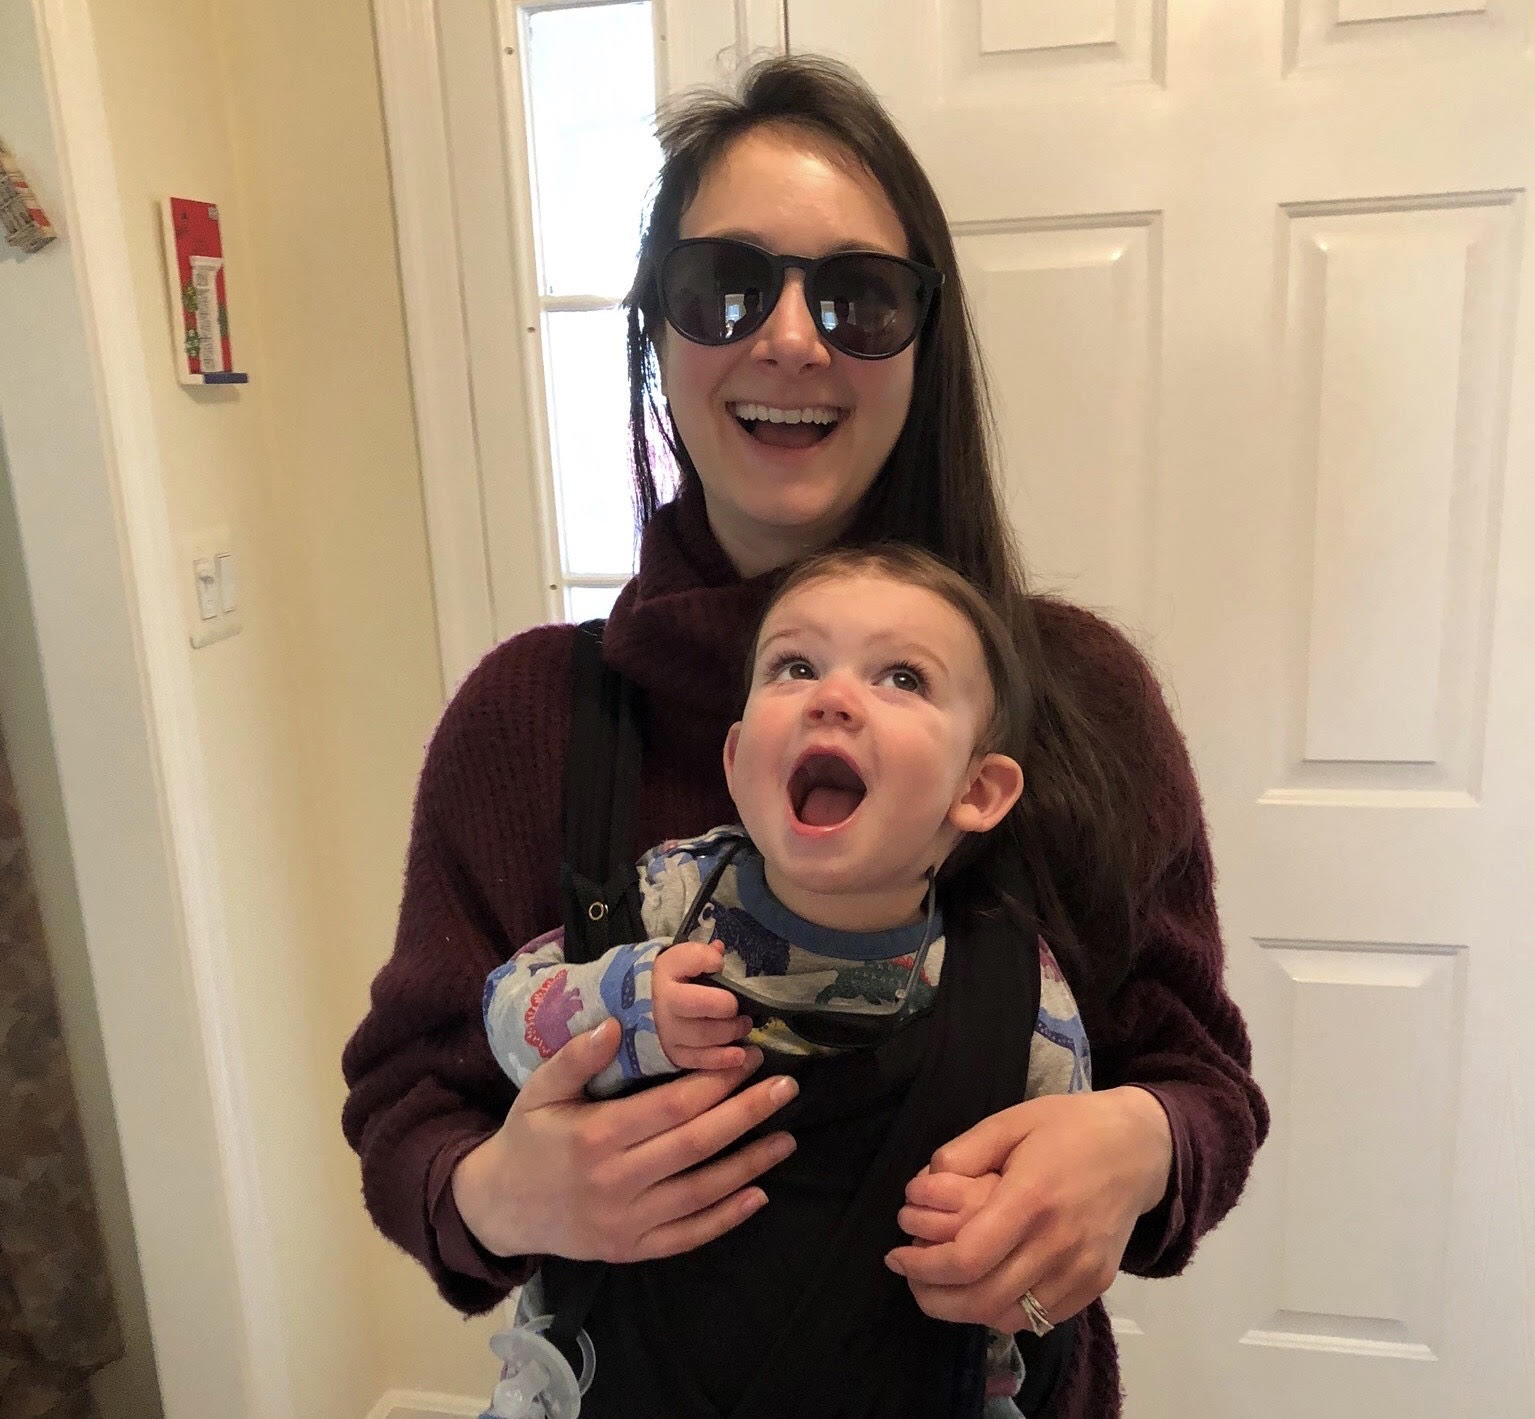 Alix and her son getting ready for a walk.